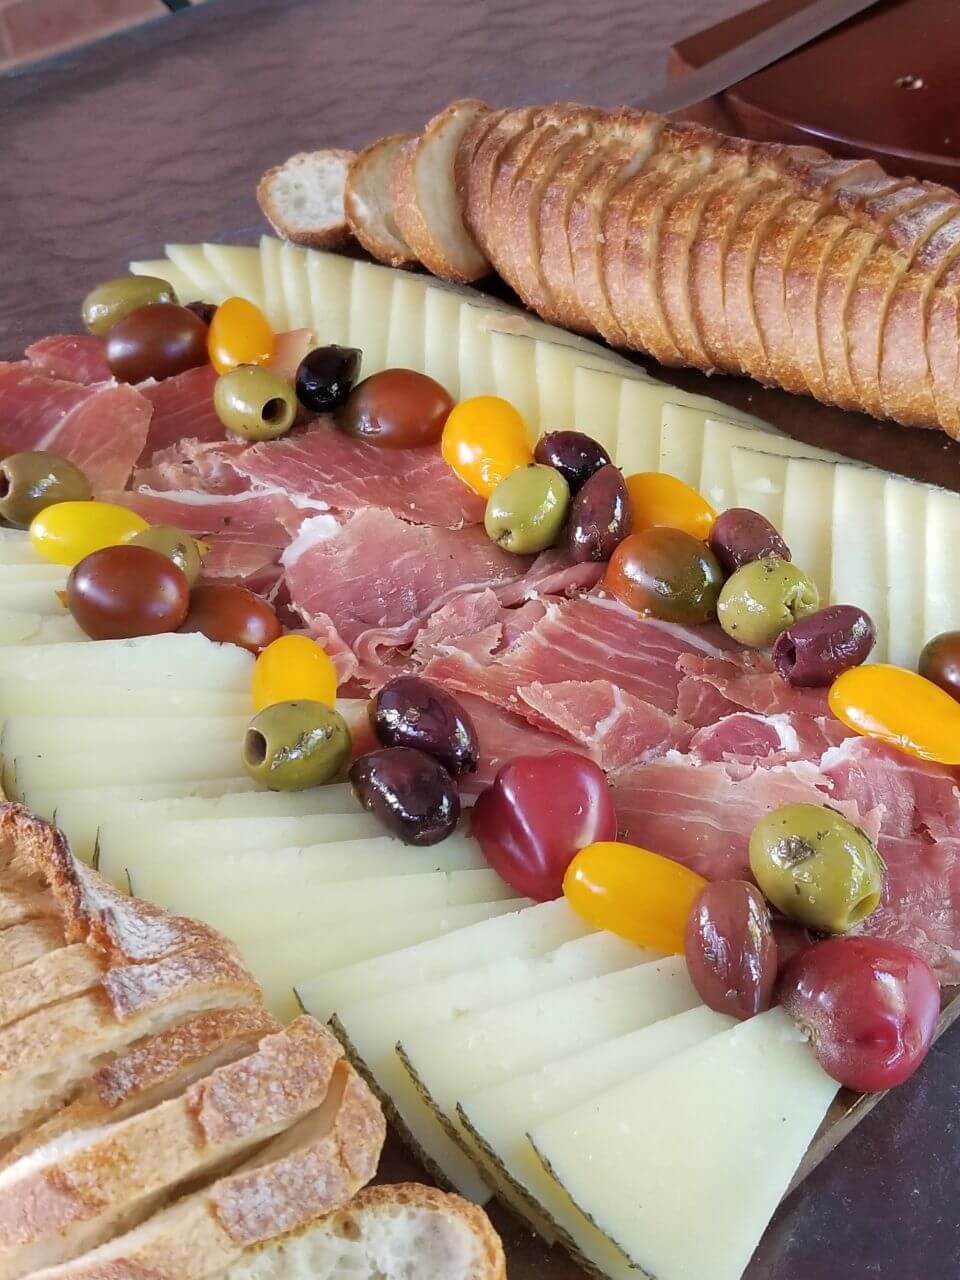 Cheese, cold cuts, tomatoes, and bread